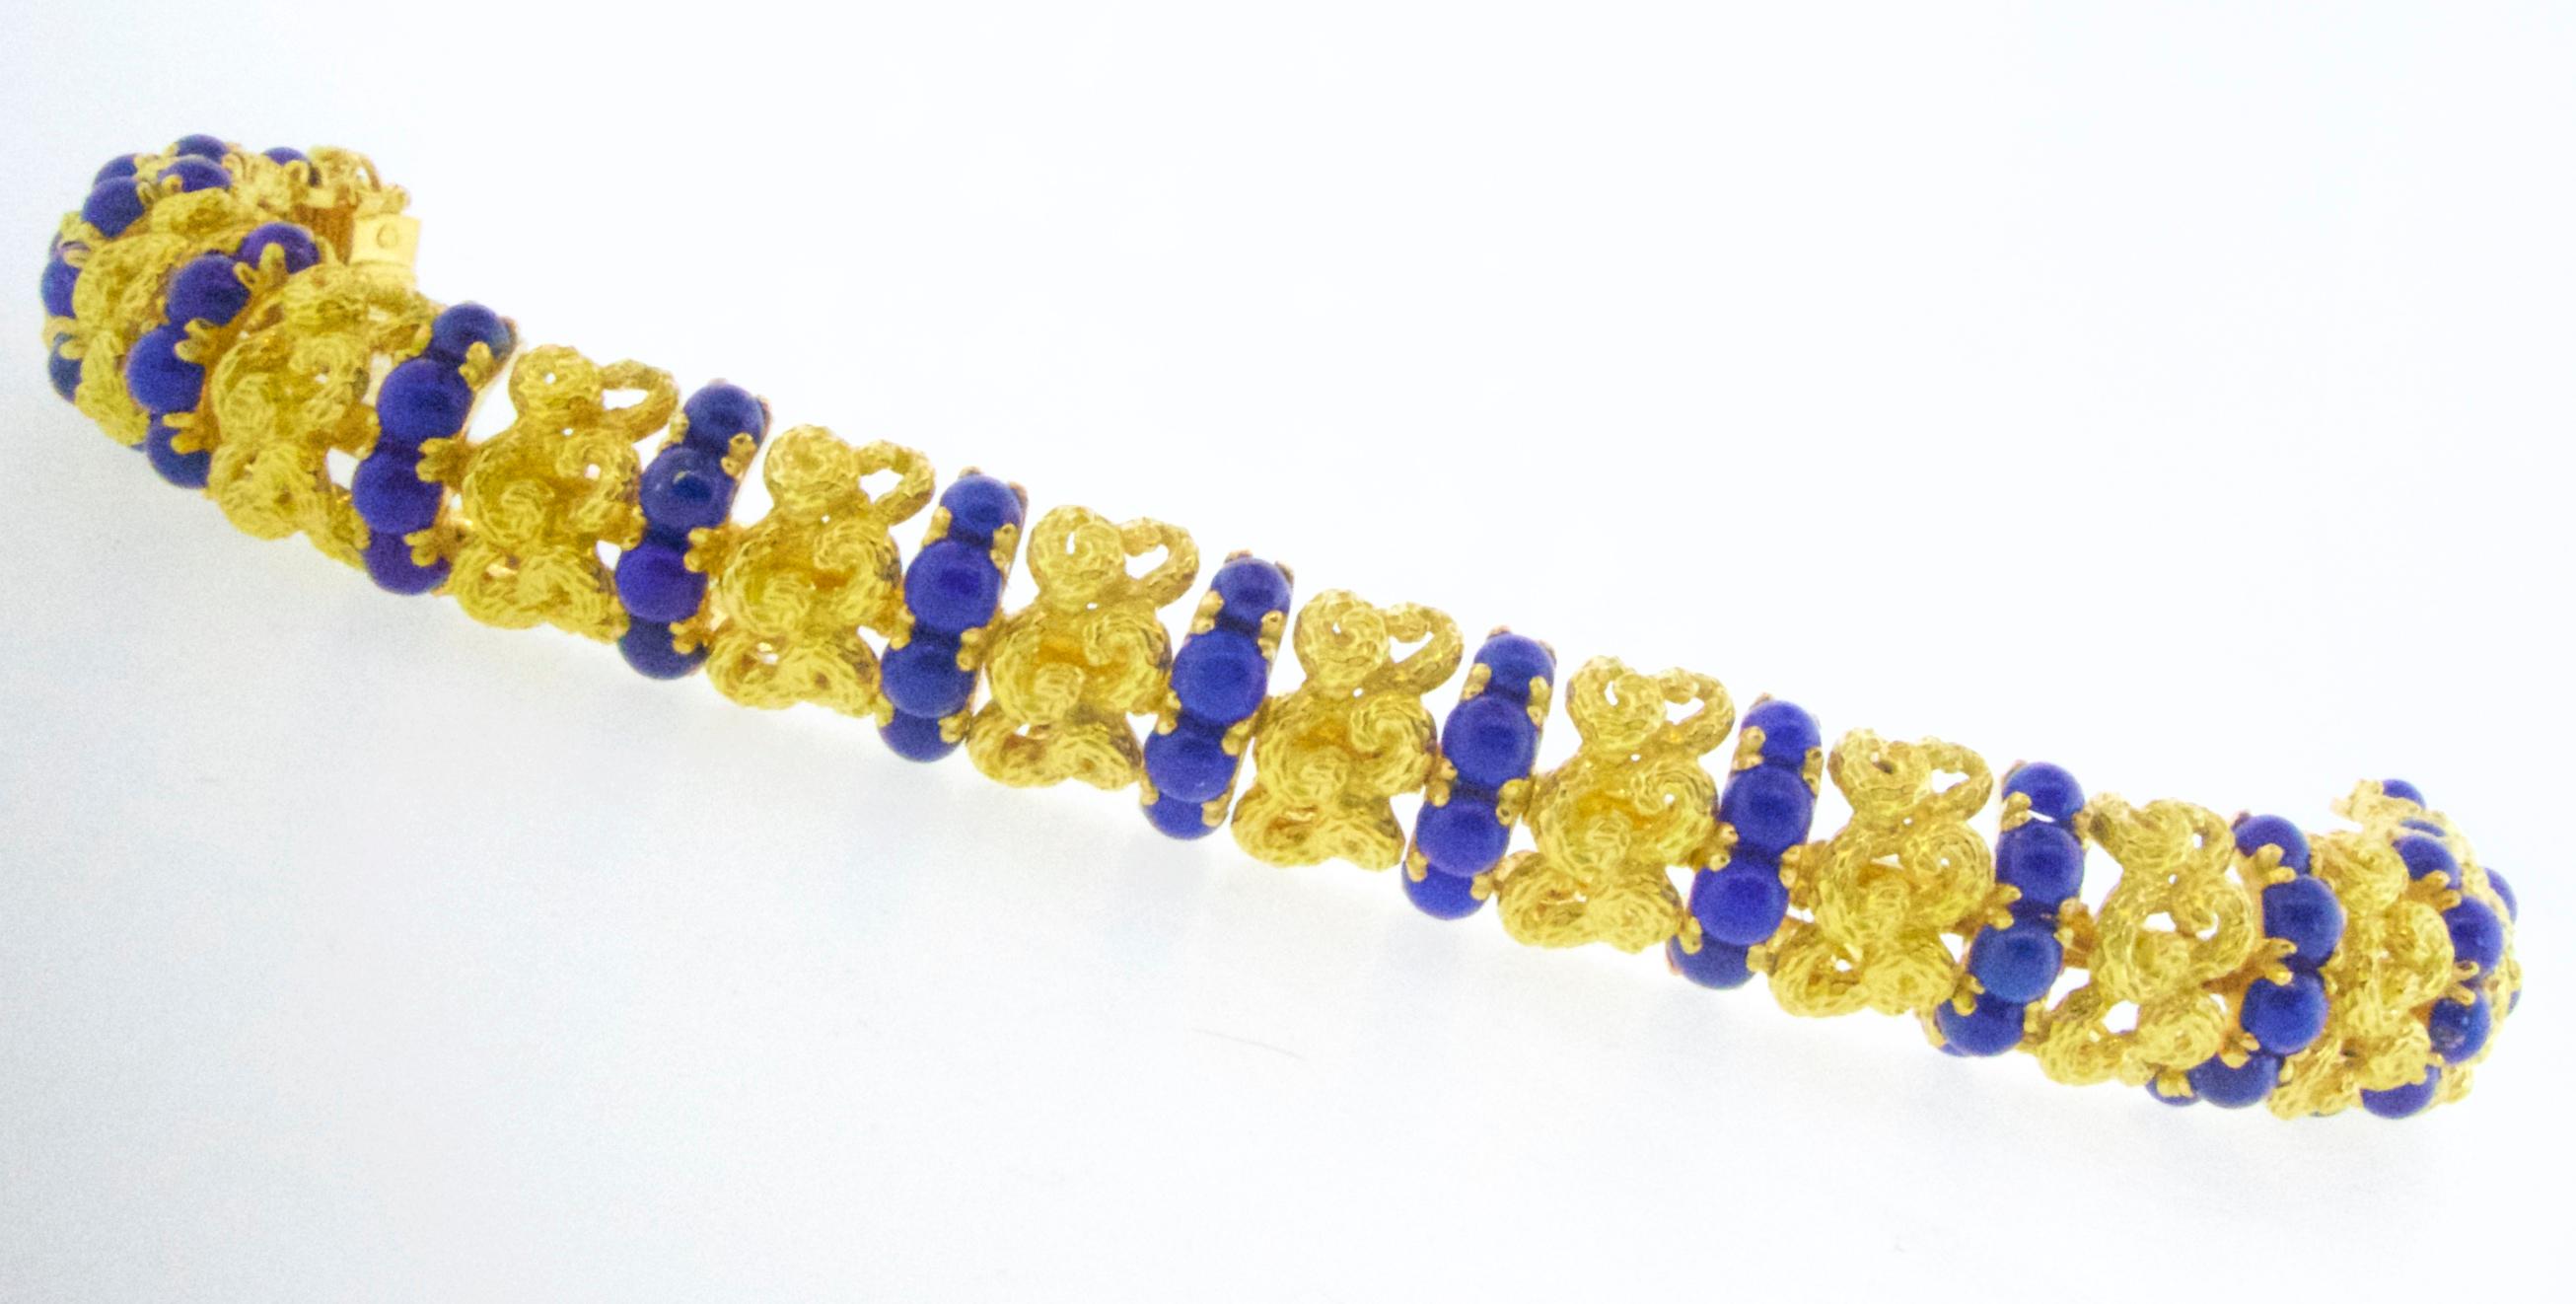 18K yellow gold weighing 87.47 grams and possessing 45 natural lapis stones prong set.  The fine Persian lapis is a vivid deep blue  and well matched.  This bracelet, in fine condition, is seven inches long and does have the maker's mark, a horse